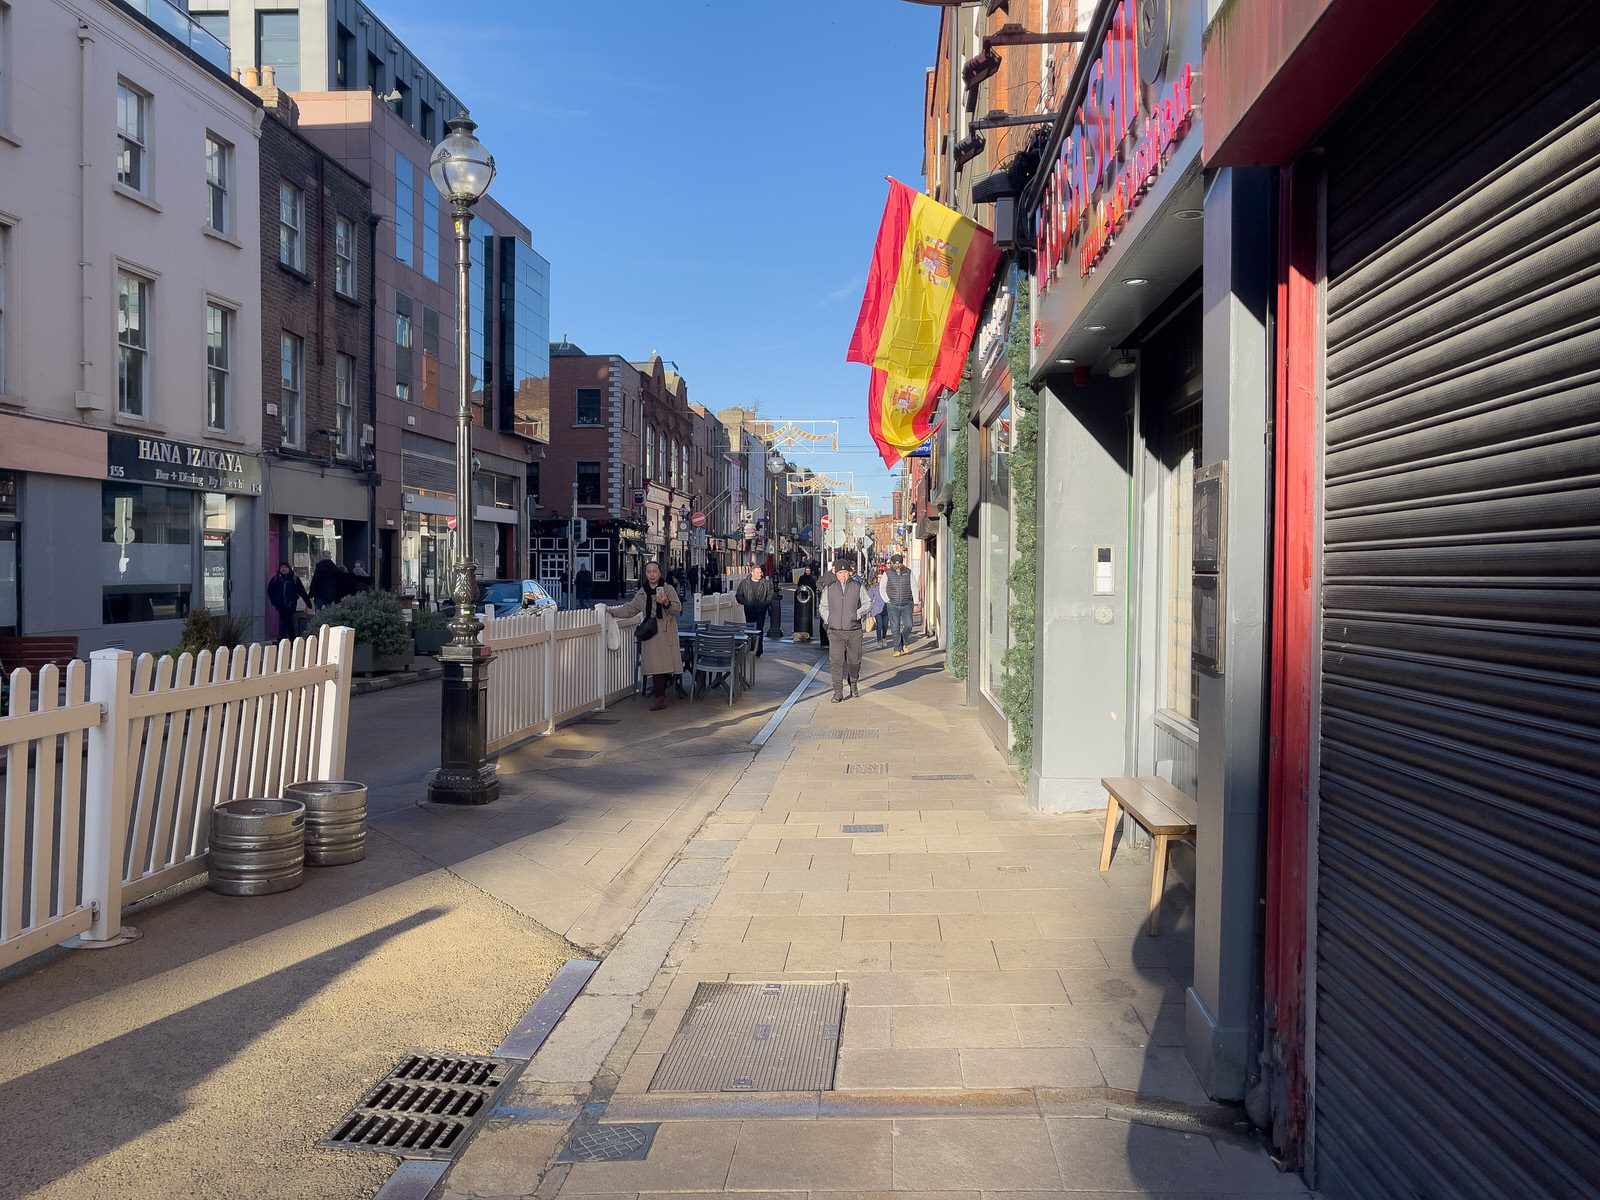 THE NEW STREET FURNITURE AND THE CHRISTMAS TREE [HAVE ARRIVED IN CAPEL STREET]-225874-1